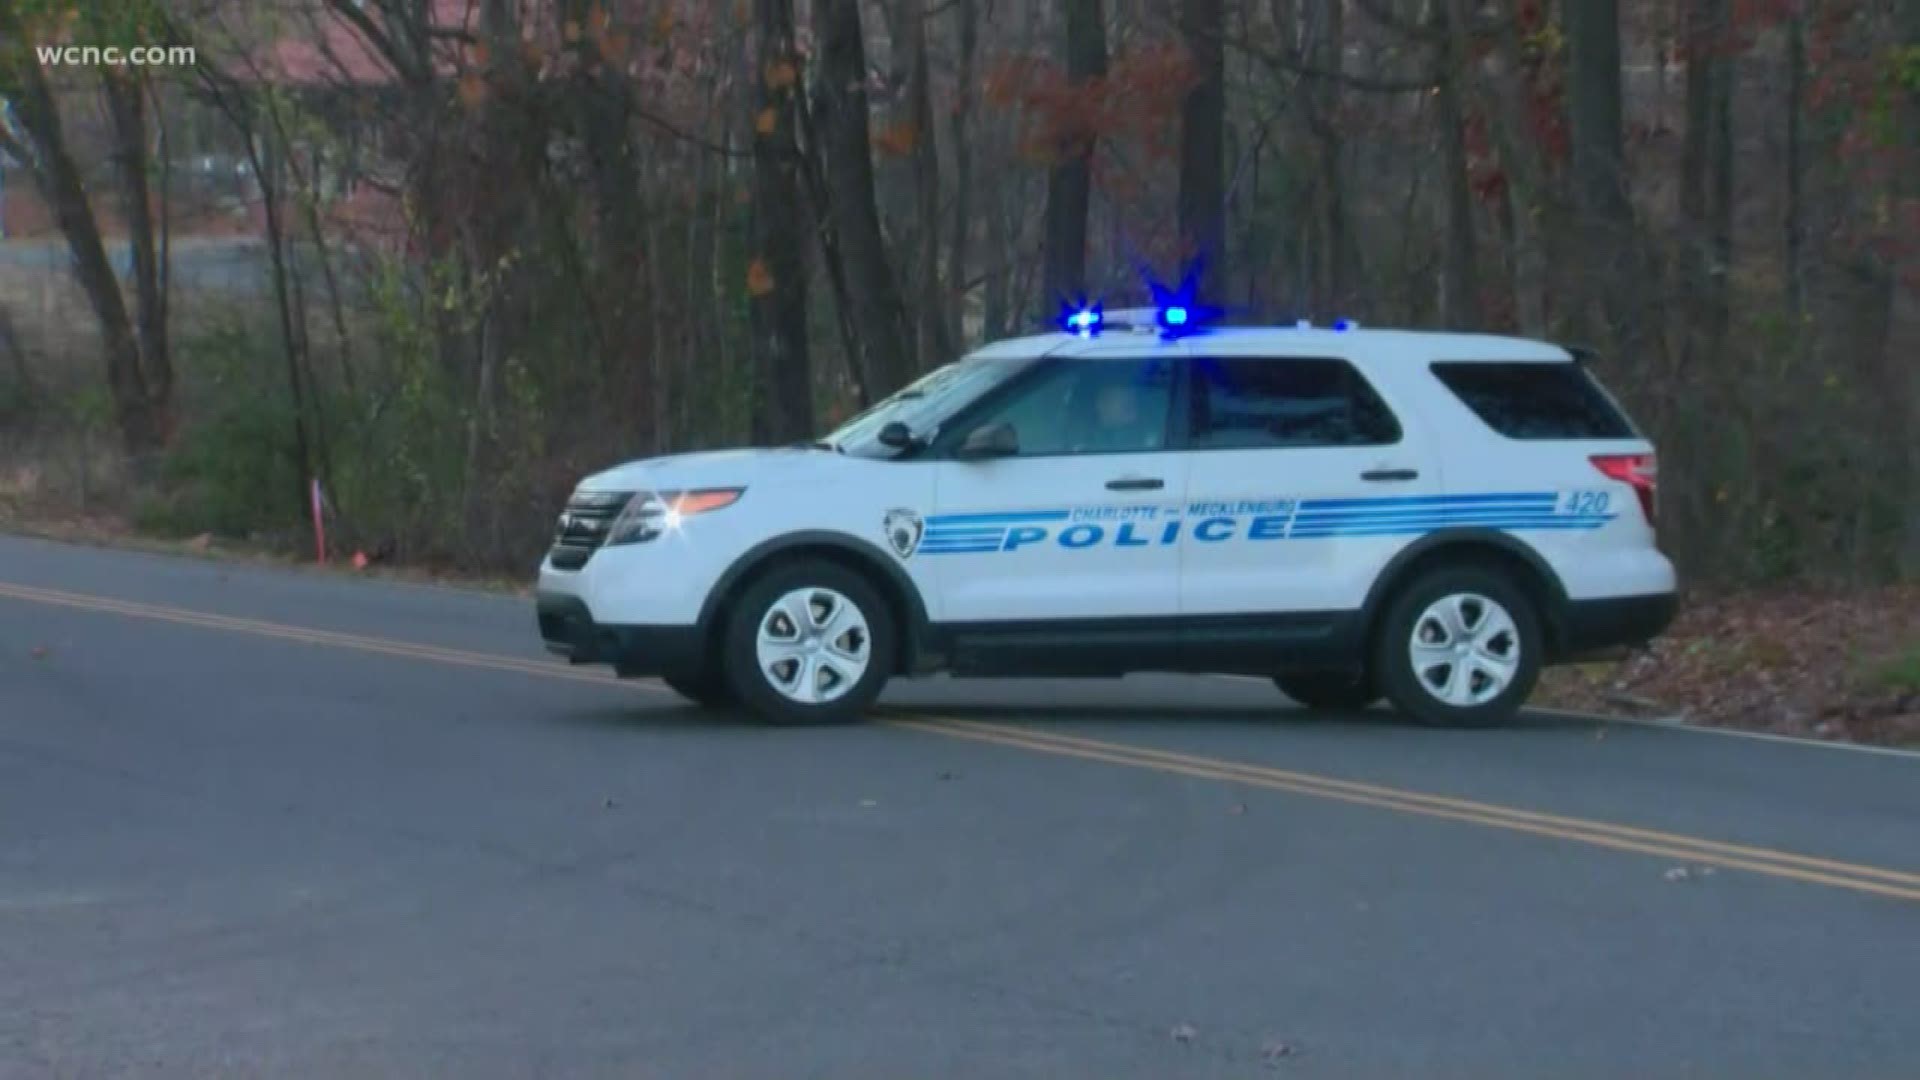 It happened around 4:30 pm. Wednesday in the 7900 block of Old Mt. Holly Rd. near Moores Chapel Rd.